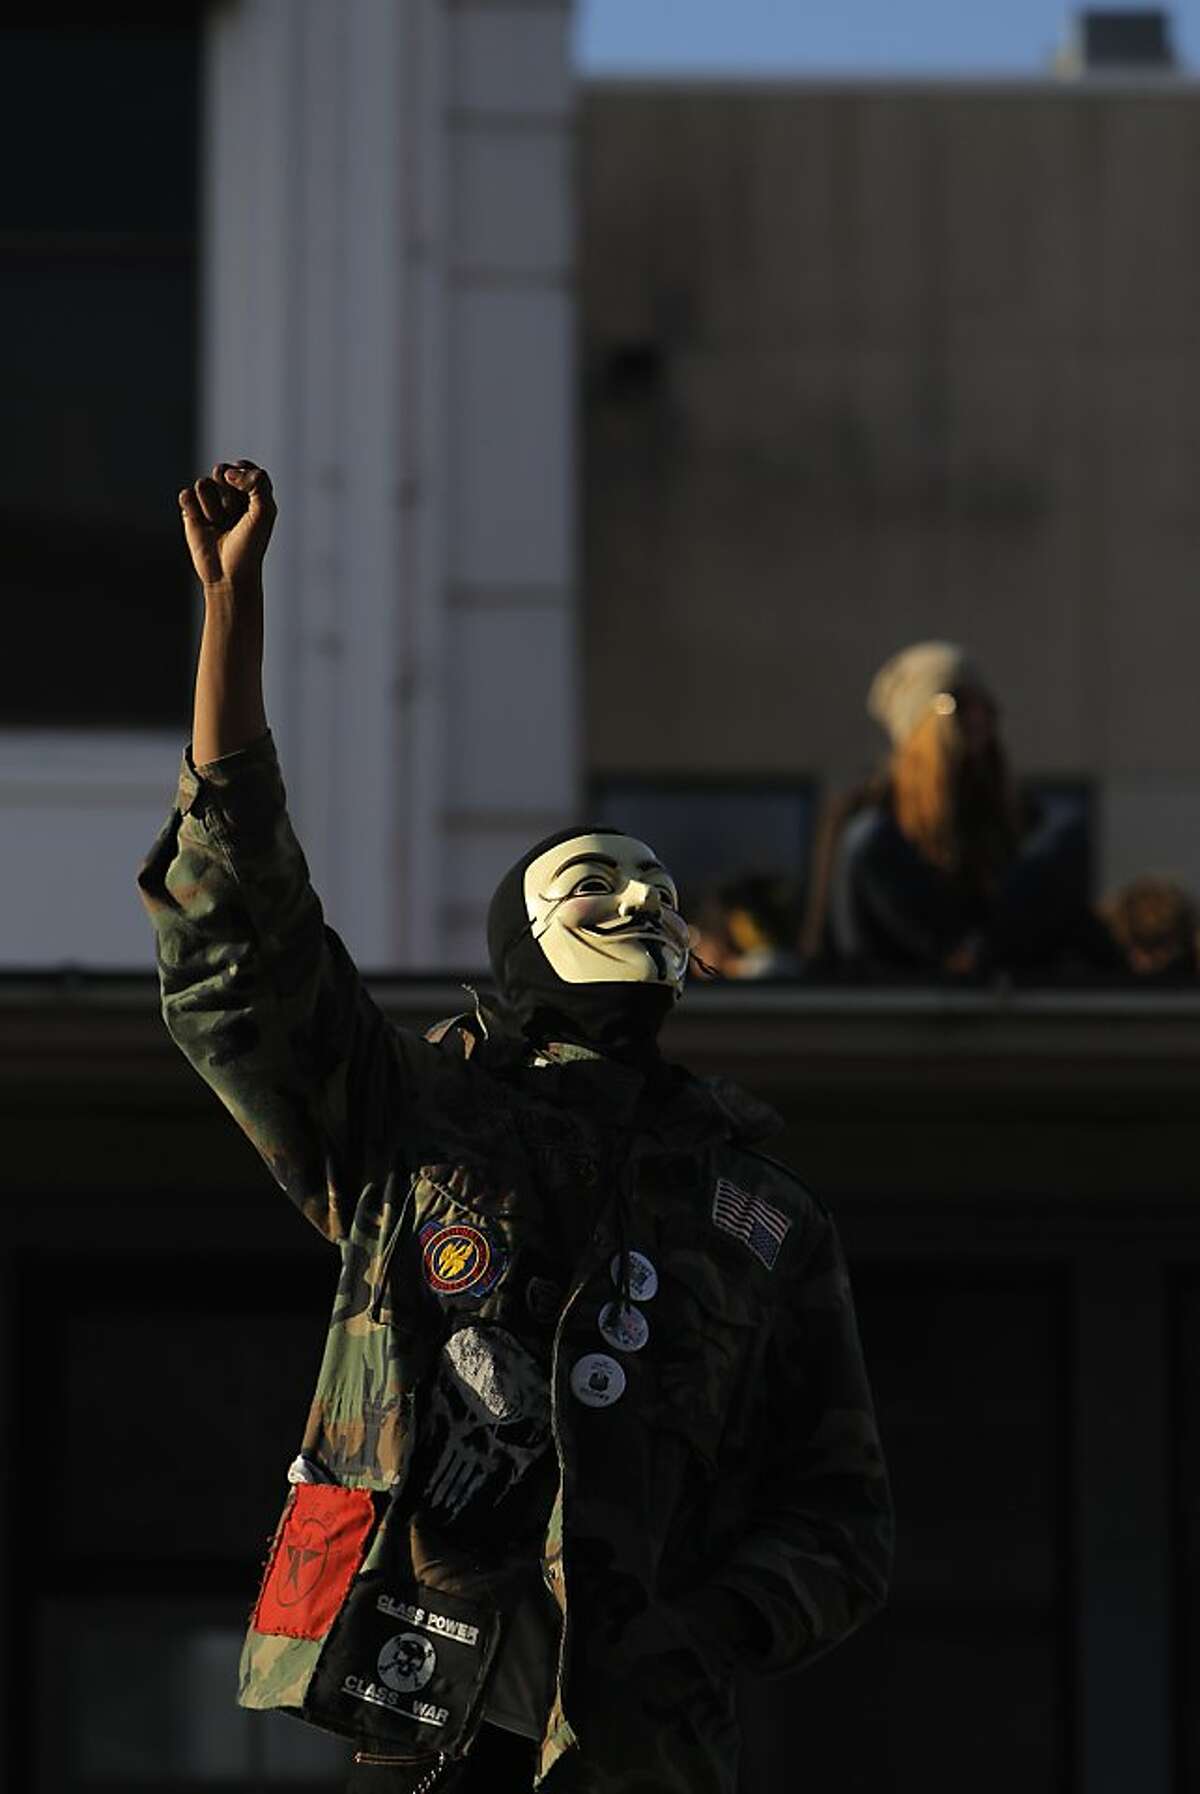 An Occupy San Francisco protester raises his fist in victory as his fellow protesters take over a building at the corner of Turk and Gough Streets in San Francisco, Calif., on Sunday, April 1, 2012, following a rally at Union Square and march up Geary.